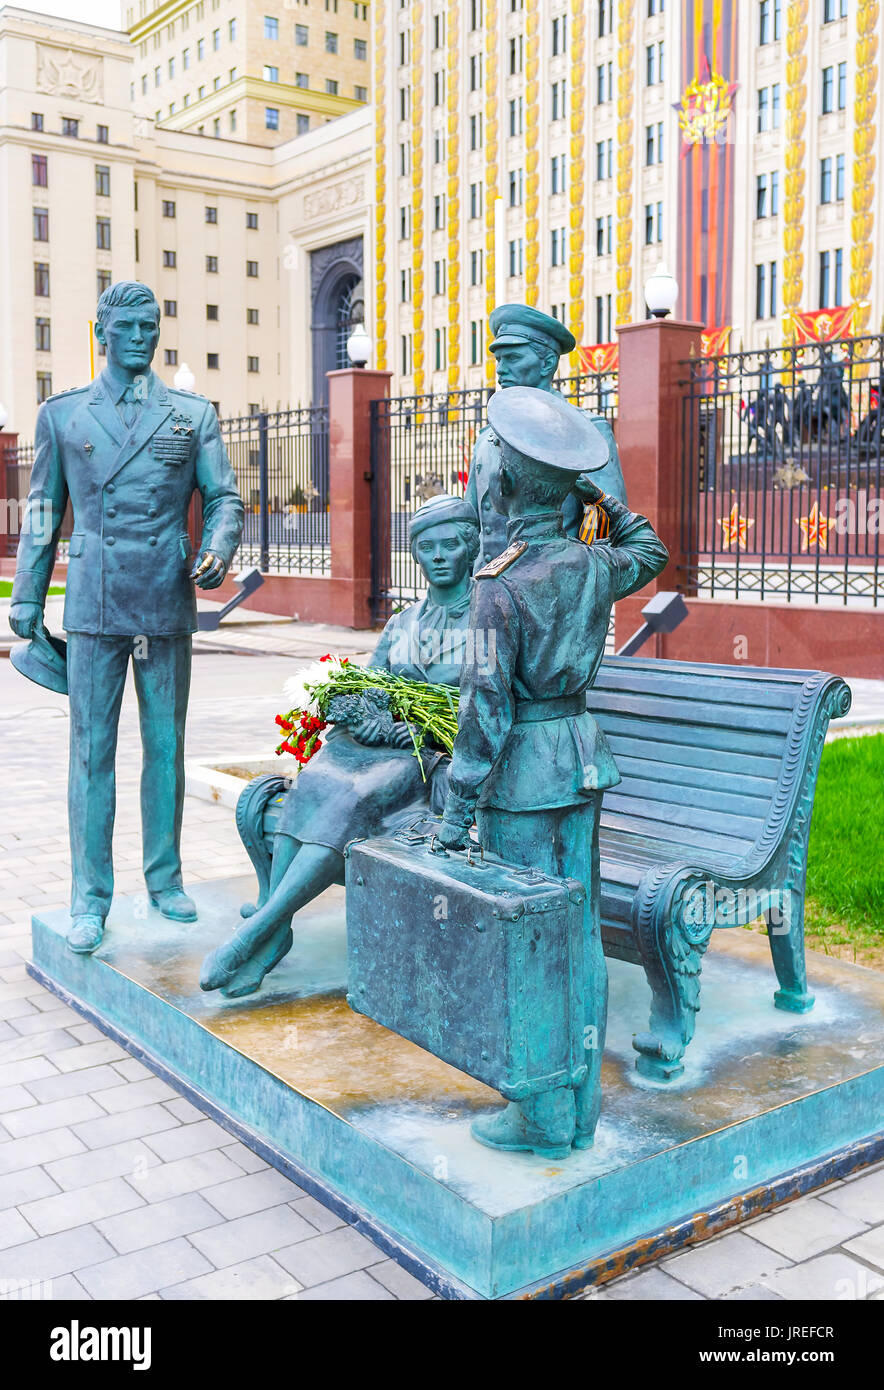 MOSCOW, RUSSIA - MAY 11, 2015: The monument to heroes of so beloved soviet movie Officers located next to the Ministry of Defense, on May 11 in Moscow Stock Photo